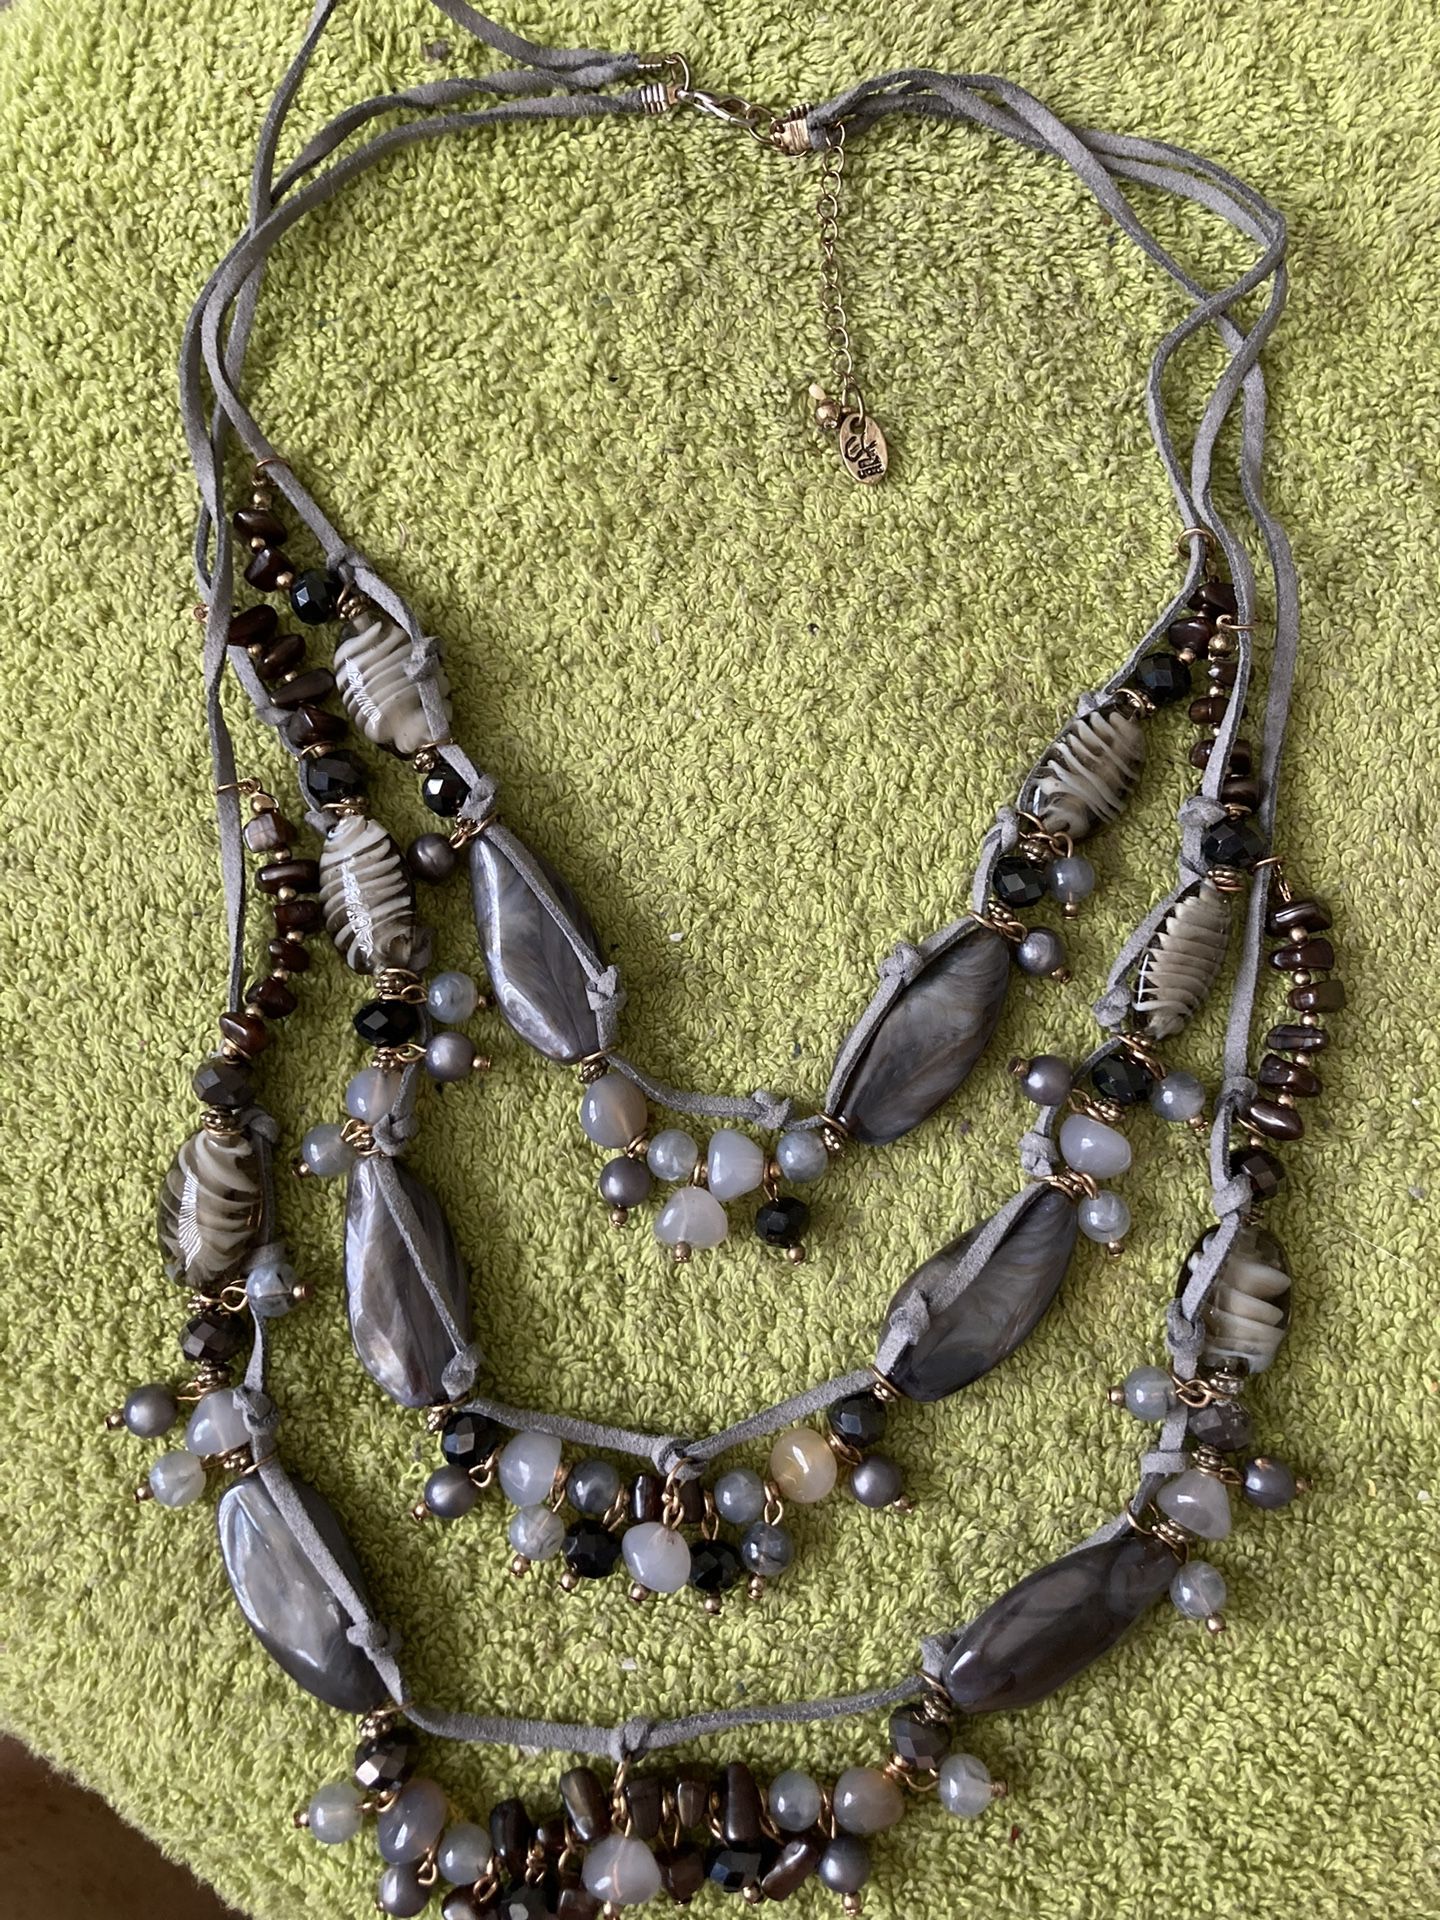 Triple Strand 20” Suede, Acrylic And Glass Stones Necklace $1.00 Matching Earrings $1.00